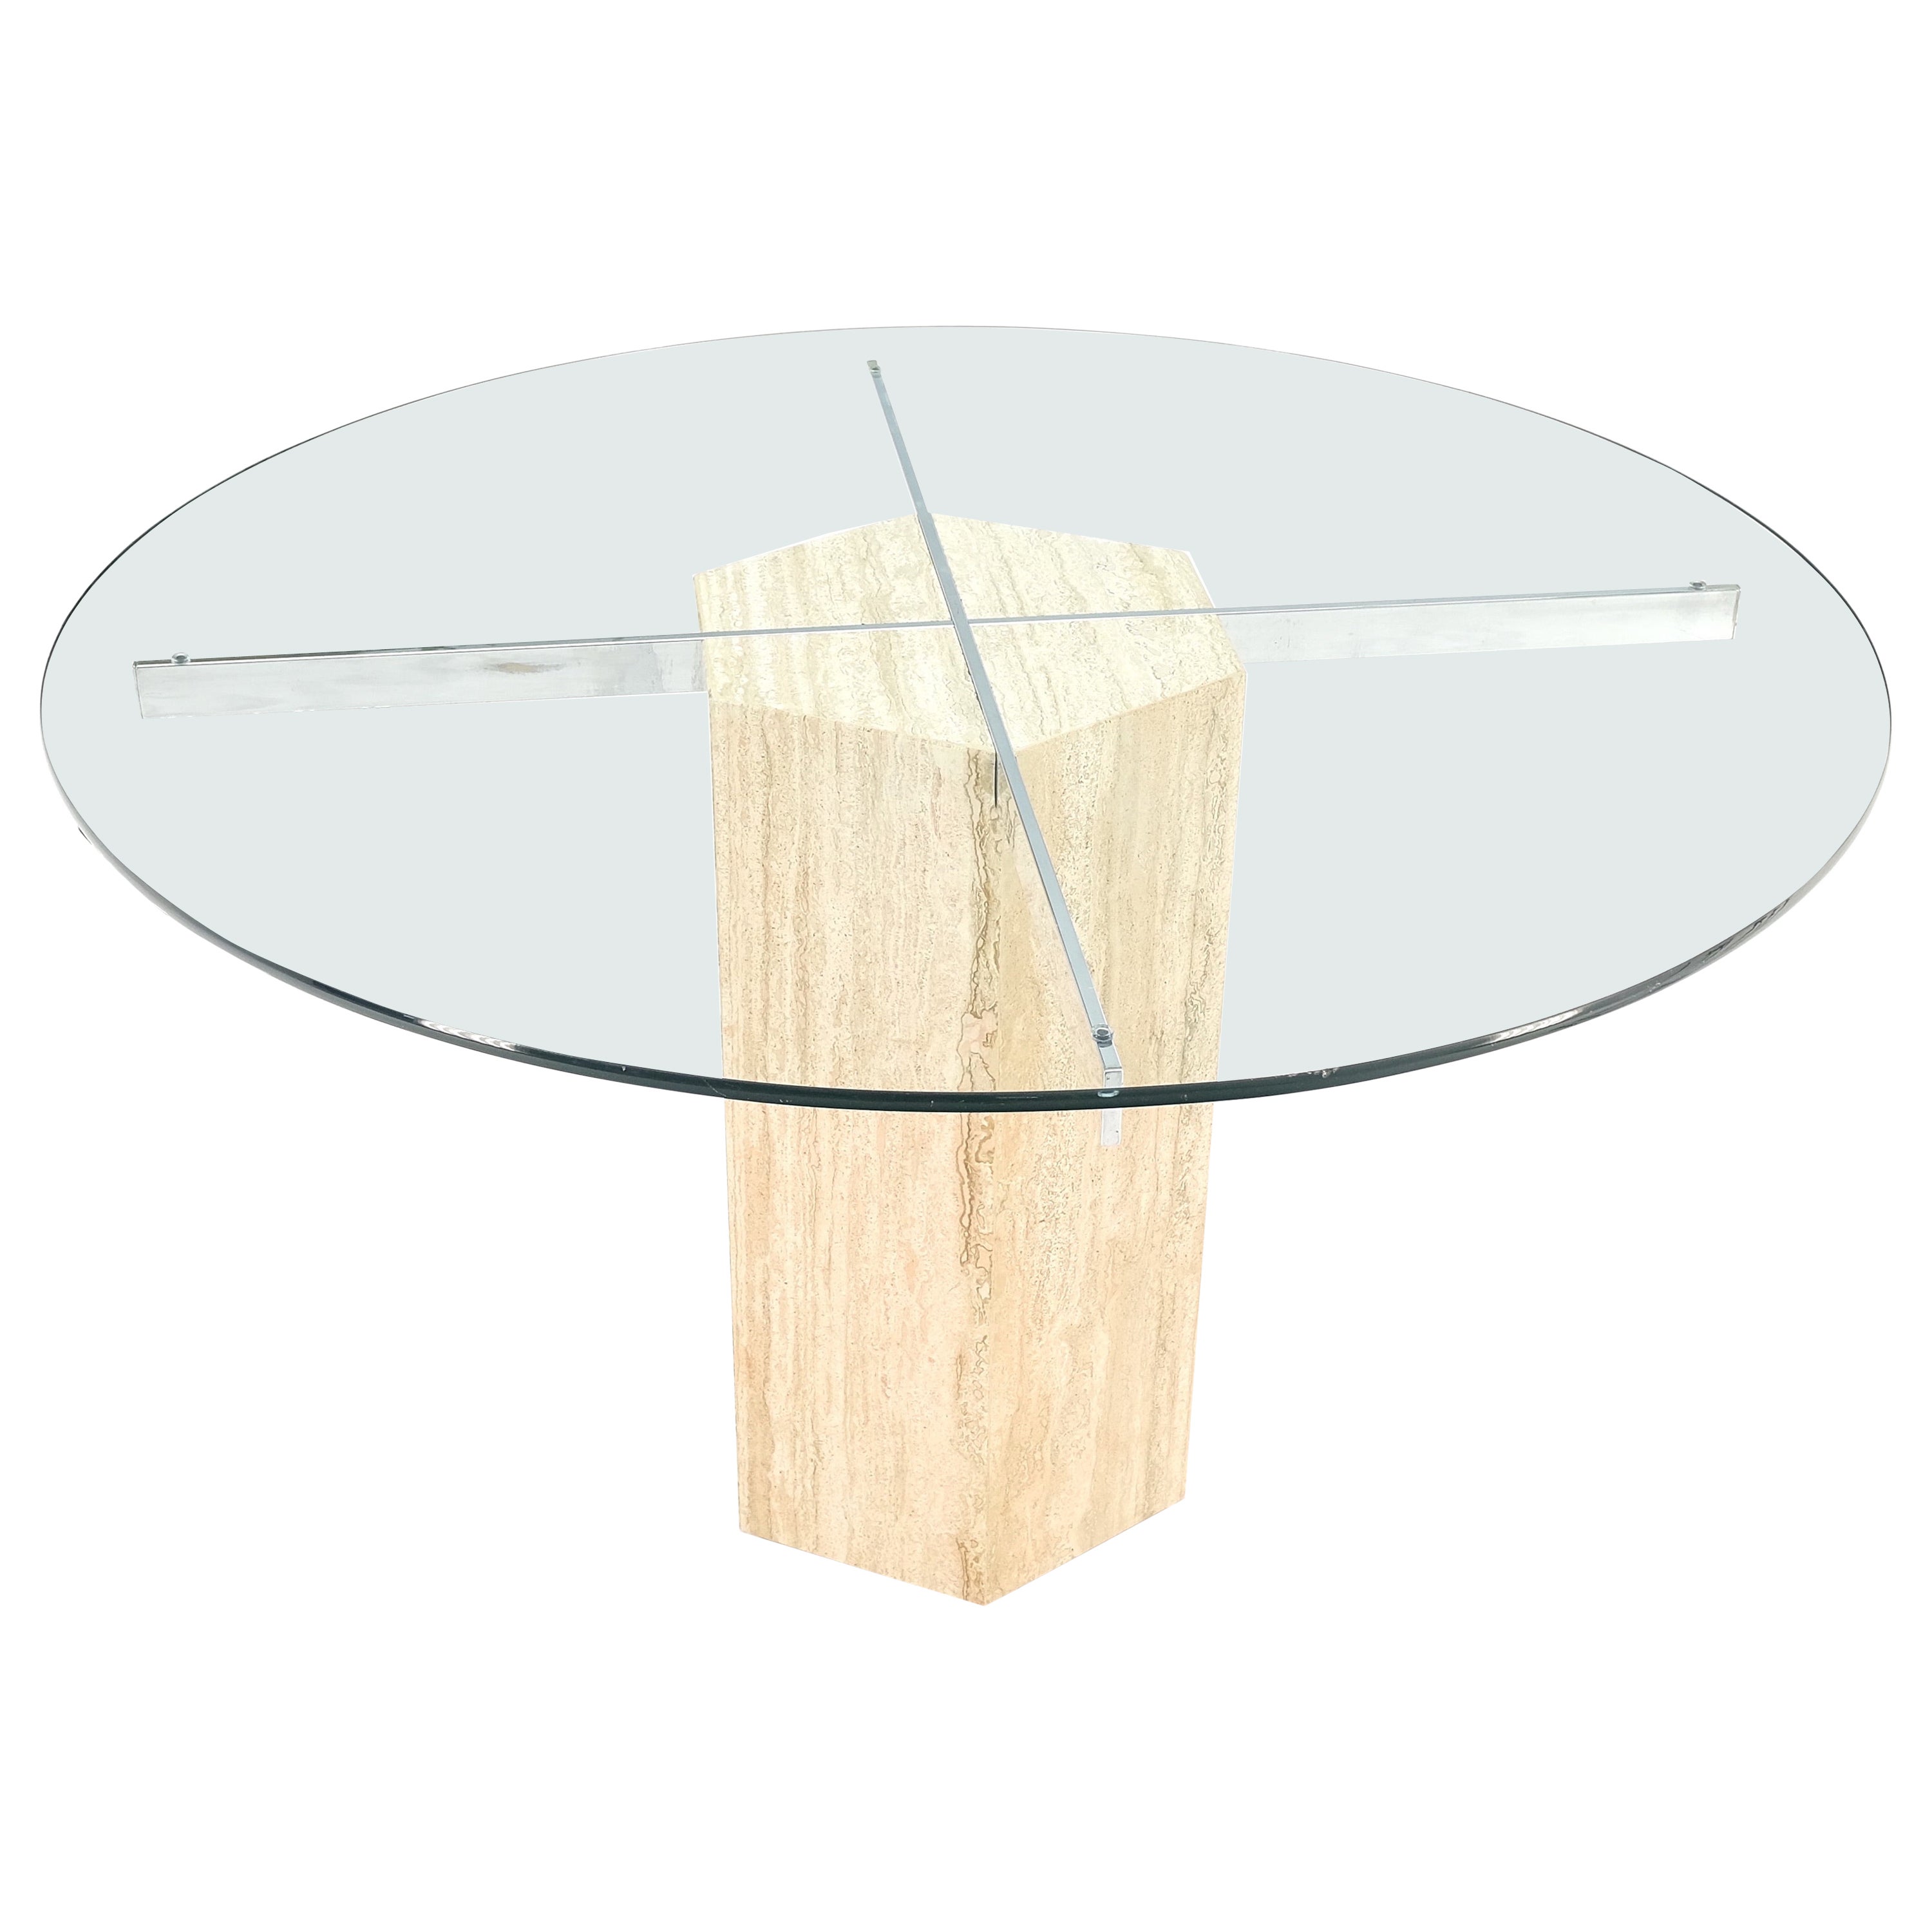 Hexagon Italian Travertine Base Glass Rond Top Mid-Century Modern Dining Table For Sale